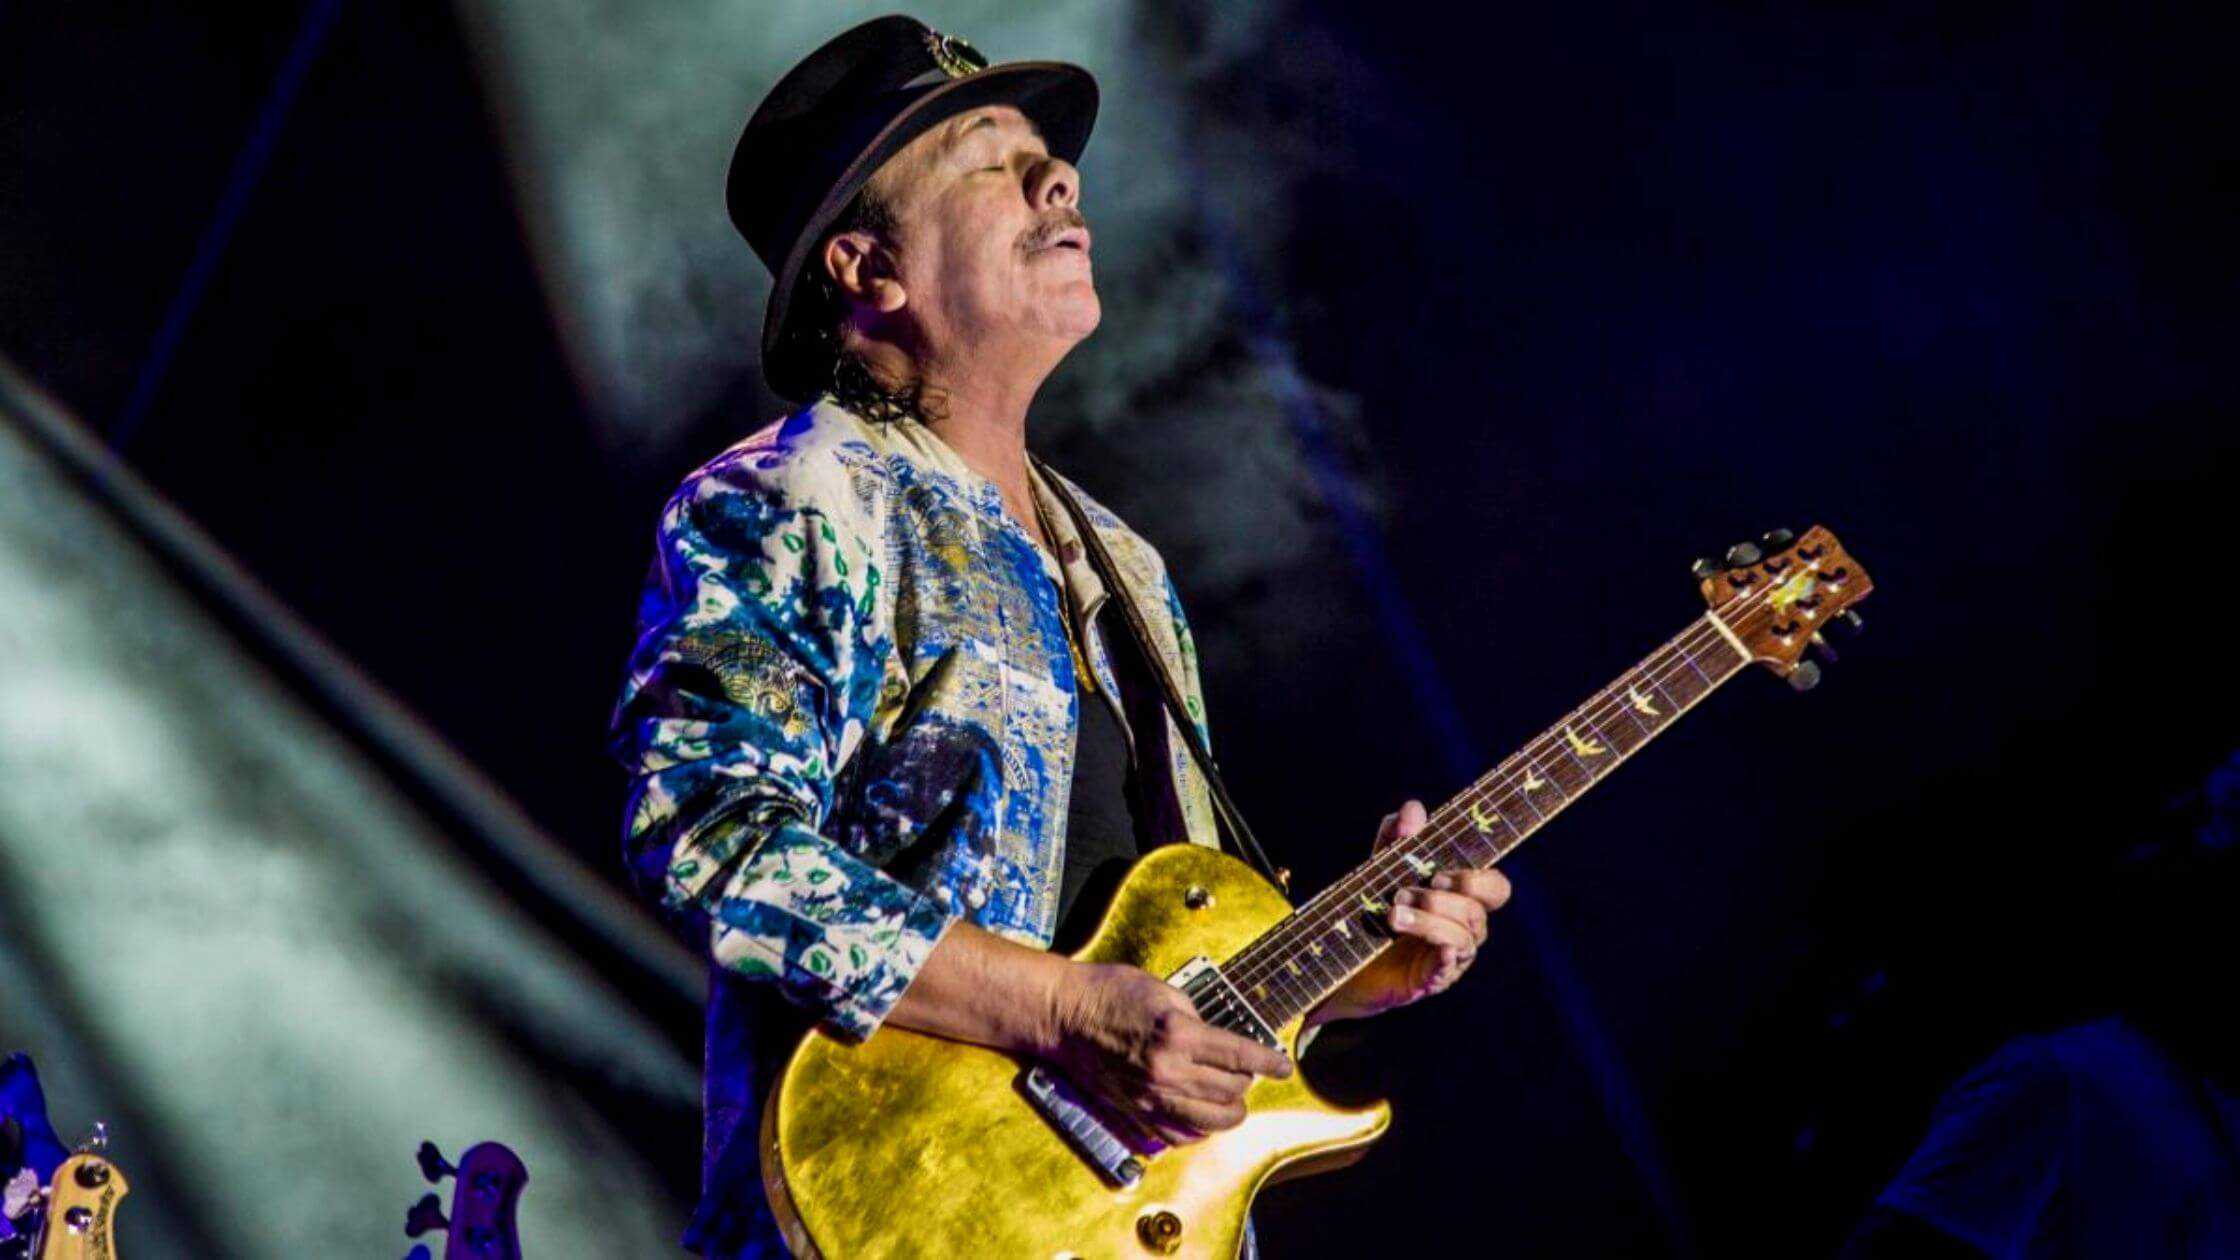 Carlos Santana Recovering After He Passed Out While On Stage